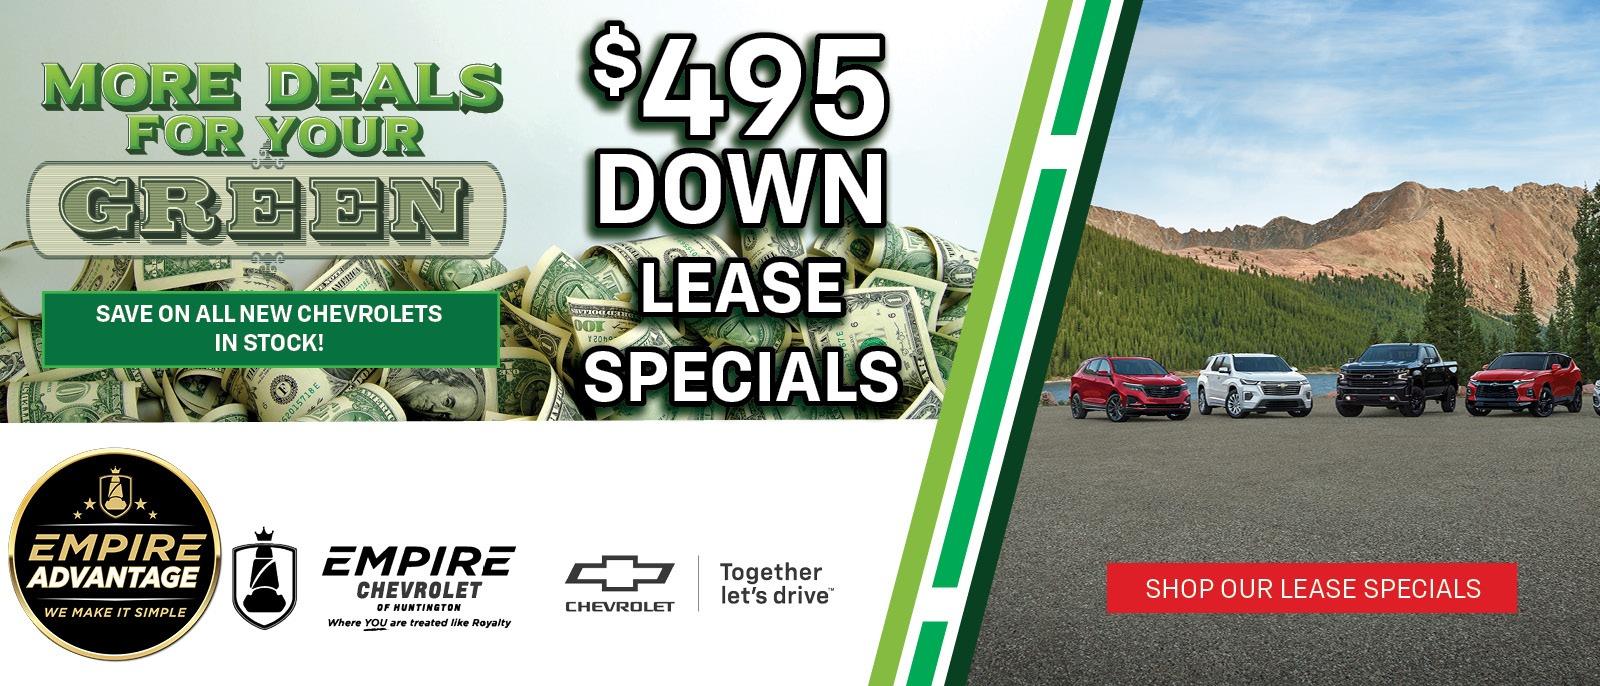 $495 Down Lease Specials